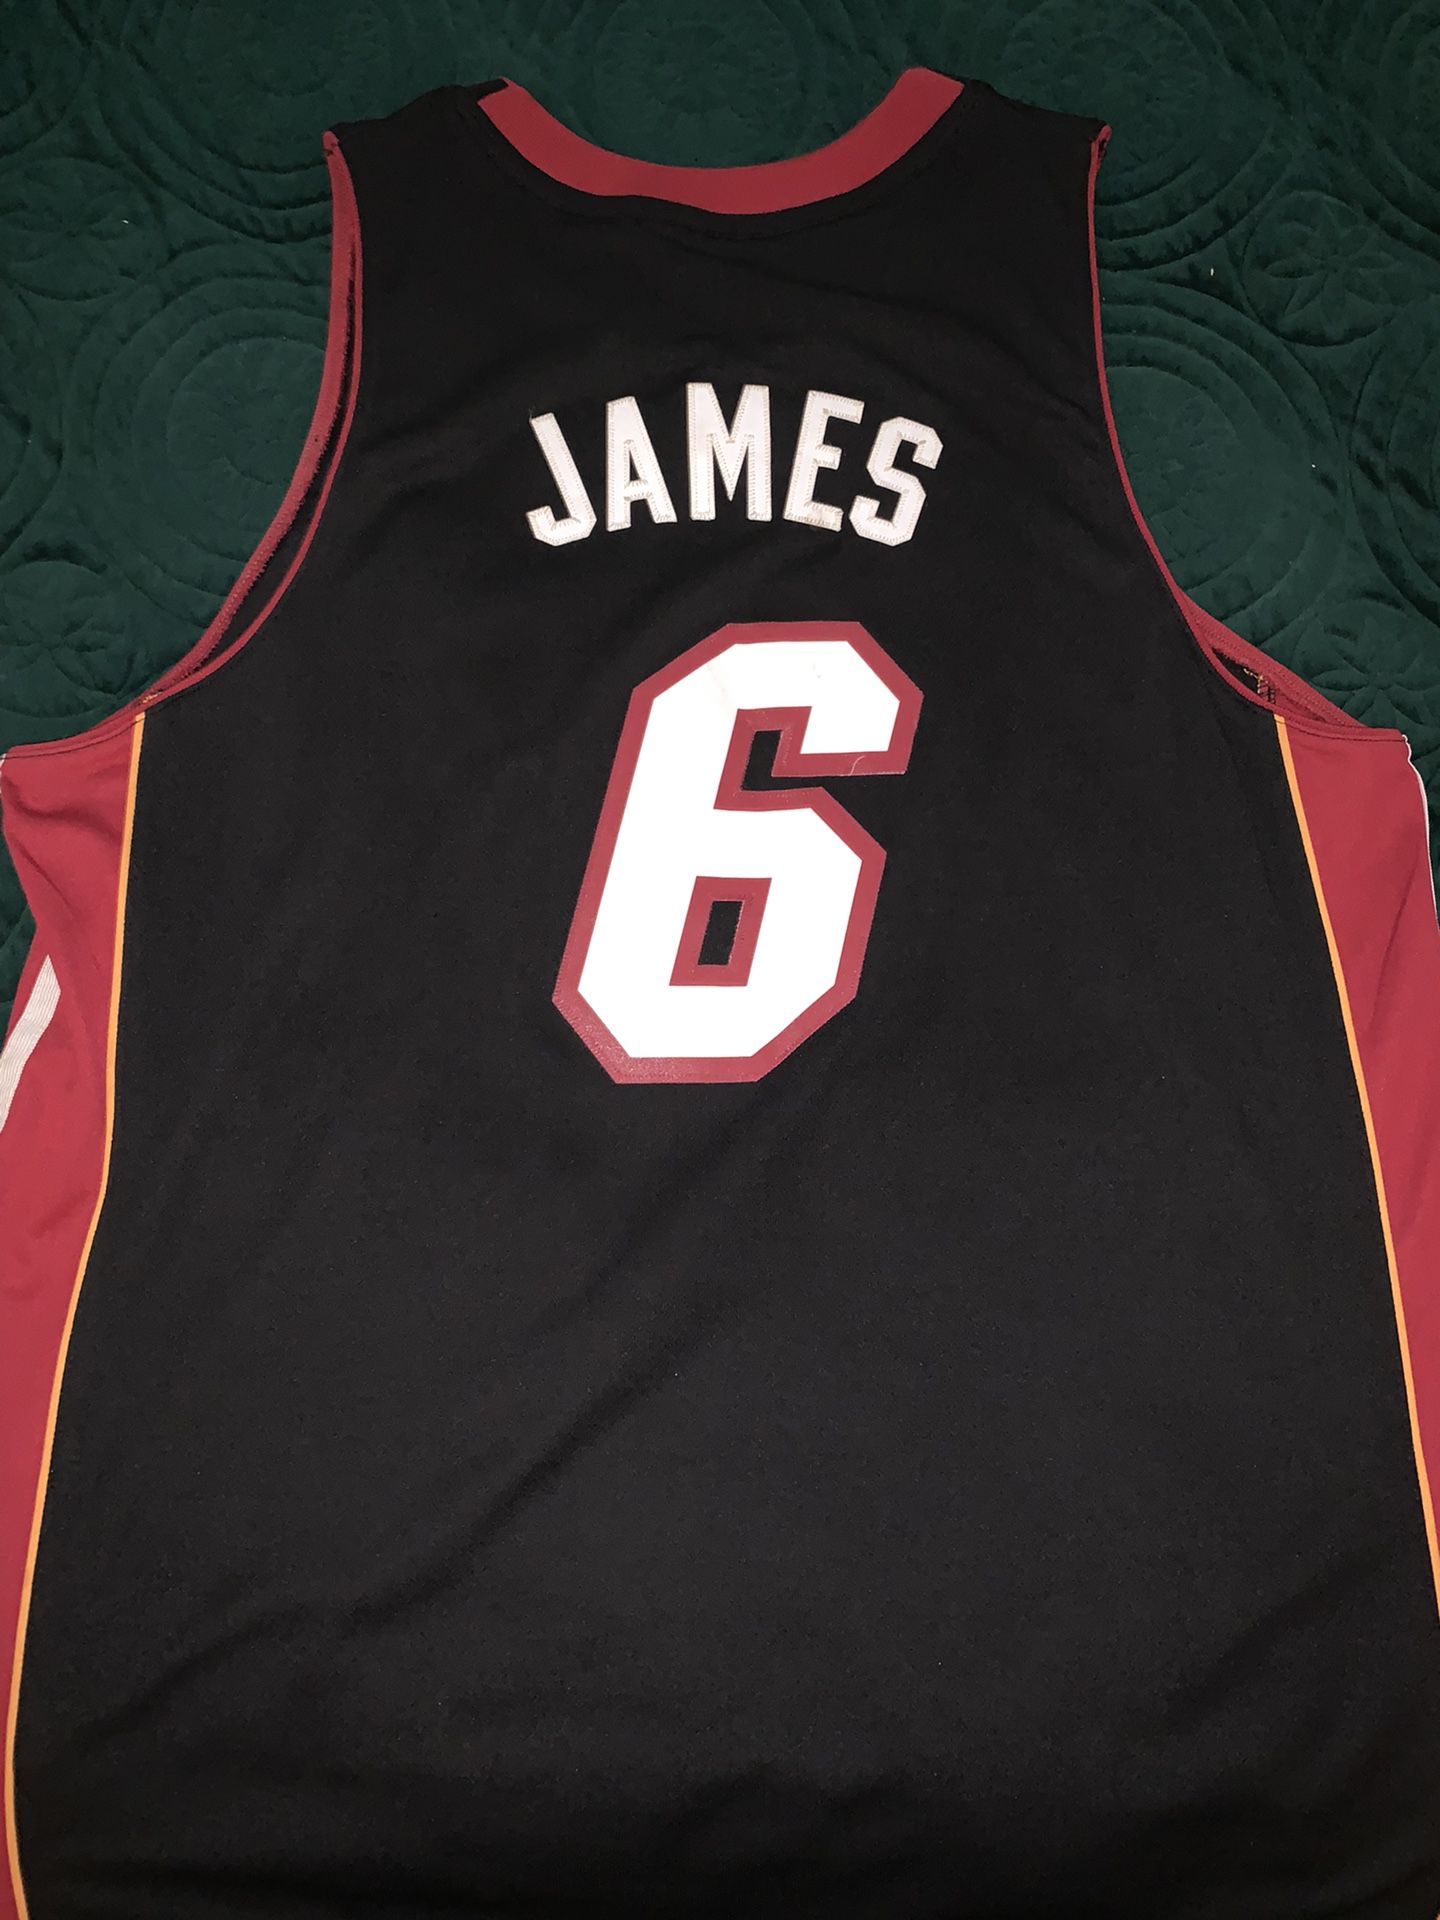 Lebron James Miami Heat Jersey - Black, Medium for Sale in Osseo, MN -  OfferUp